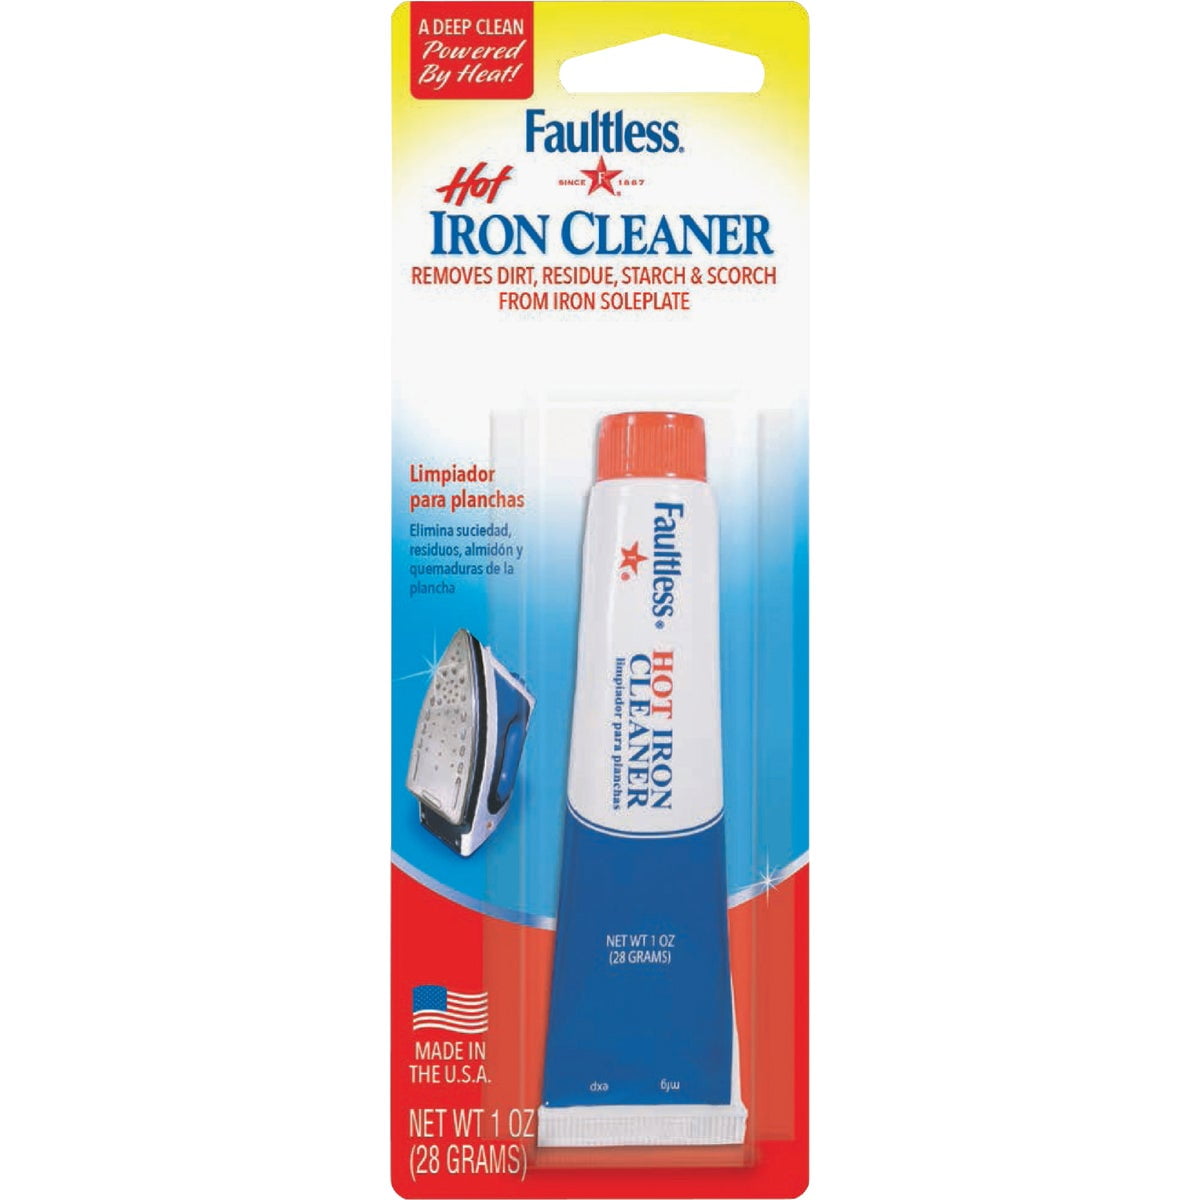 FAULTLESS Hot Iron Cleaner, Non-Toxic Steam Iron Cleaner, Removes Melted  Fabrics, Glue, Hard Water, Lime Deposits & Starch - 2 X 0.17 oz Tubes  Blister